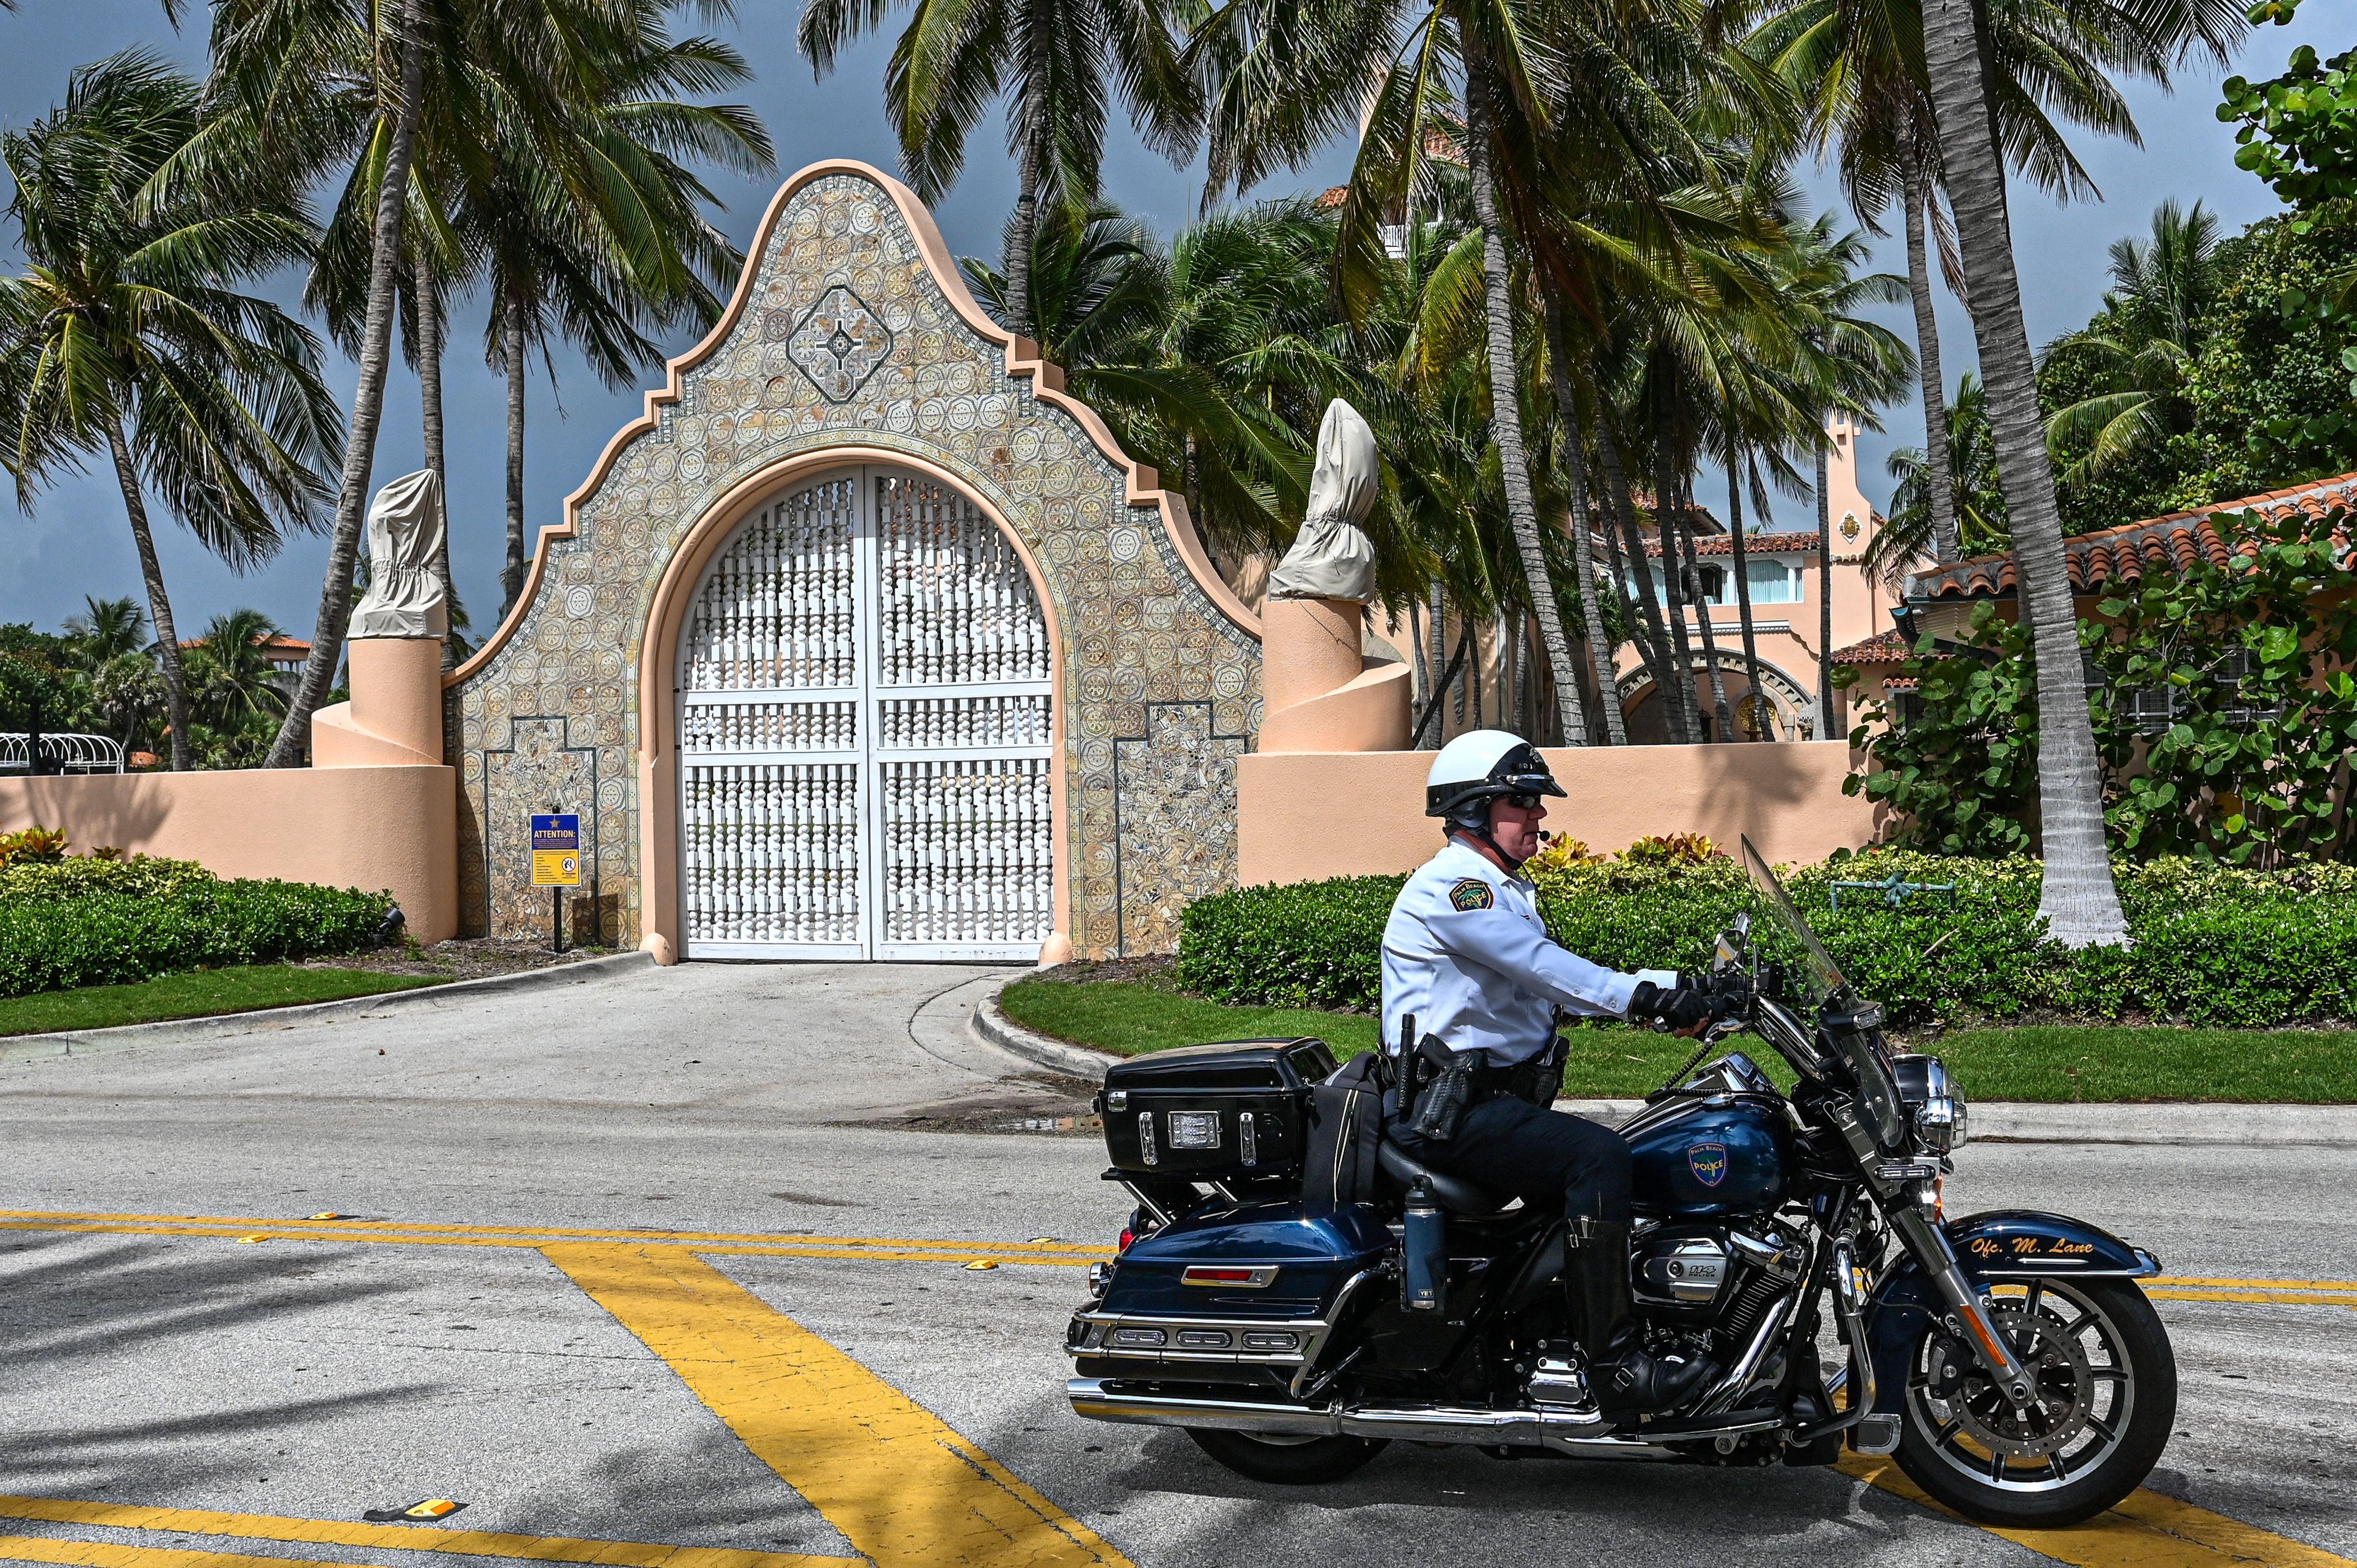 An officer on a motorcycle sits in front of the gated entrance to Mar-a-Lago.